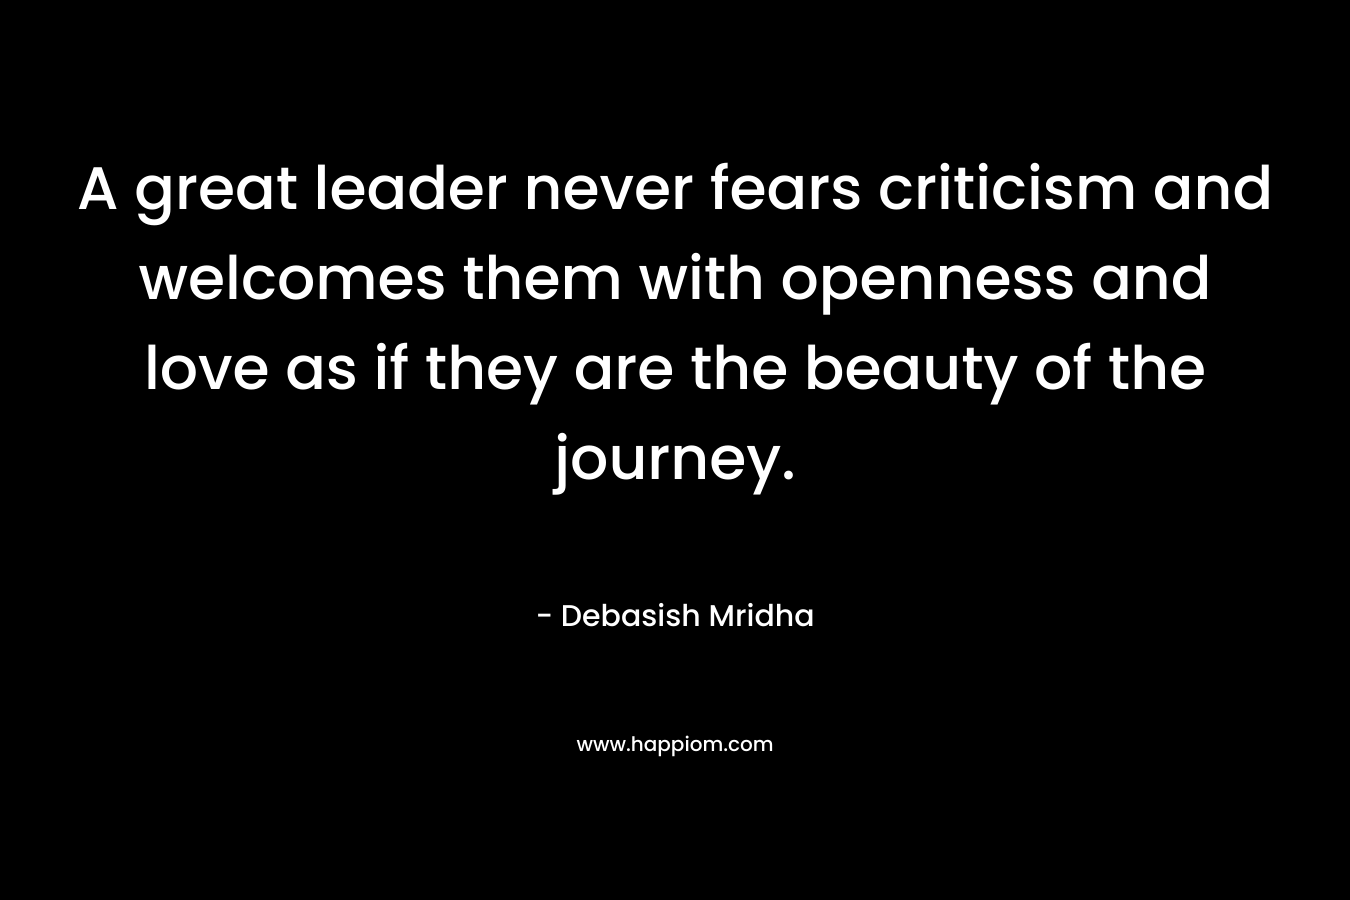 A great leader never fears criticism and welcomes them with openness and love as if they are the beauty of the journey.